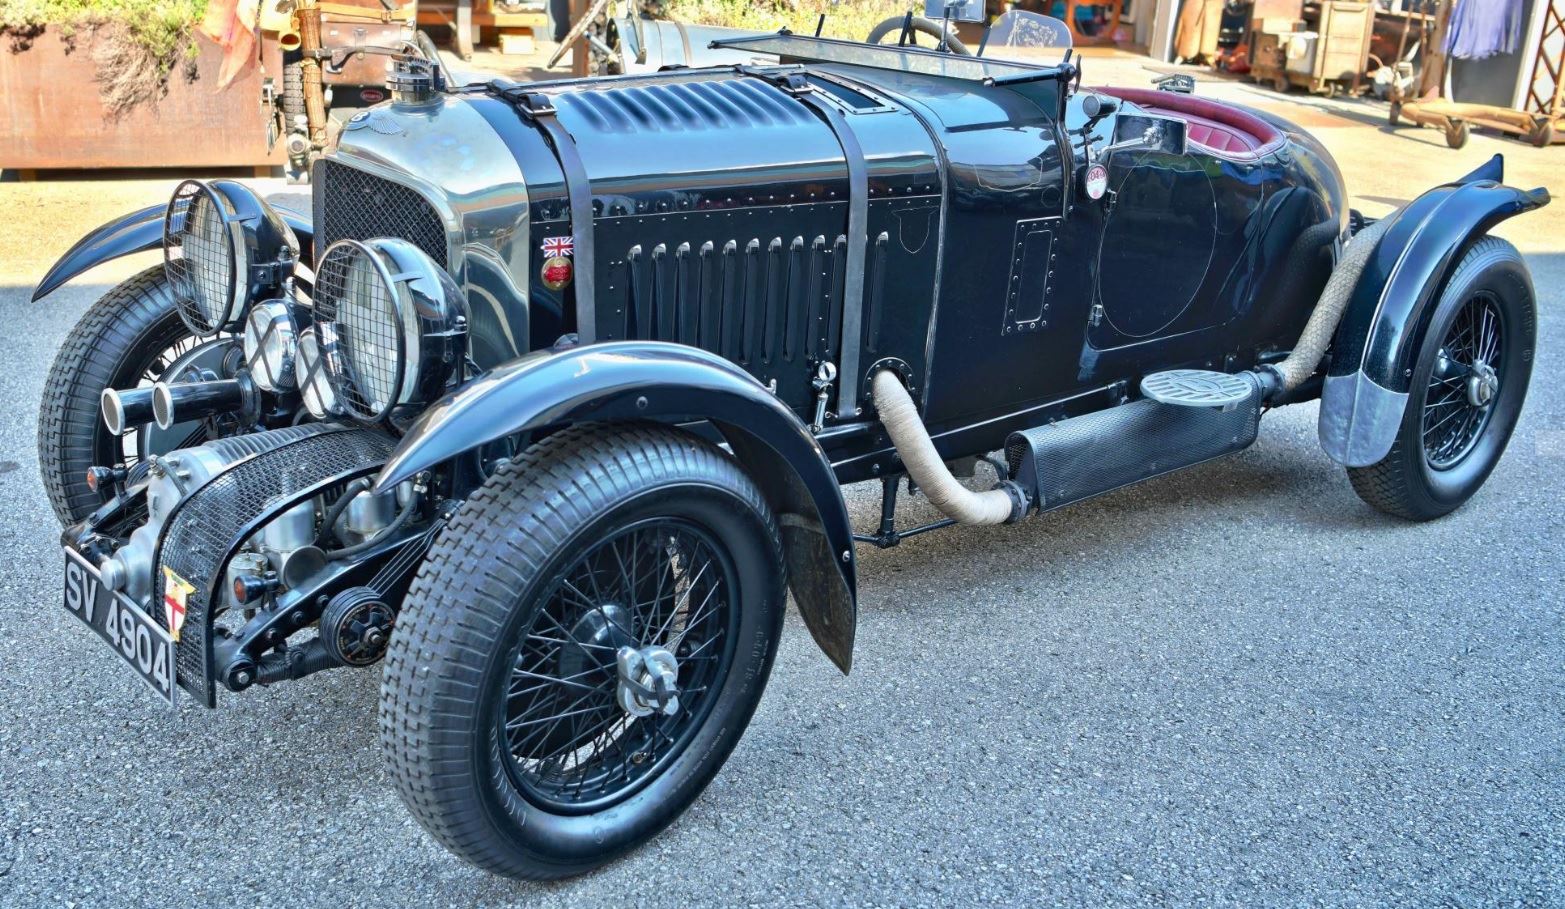 Bentley 4.5 litre blower oecmywhfrccmg0mgoihcb